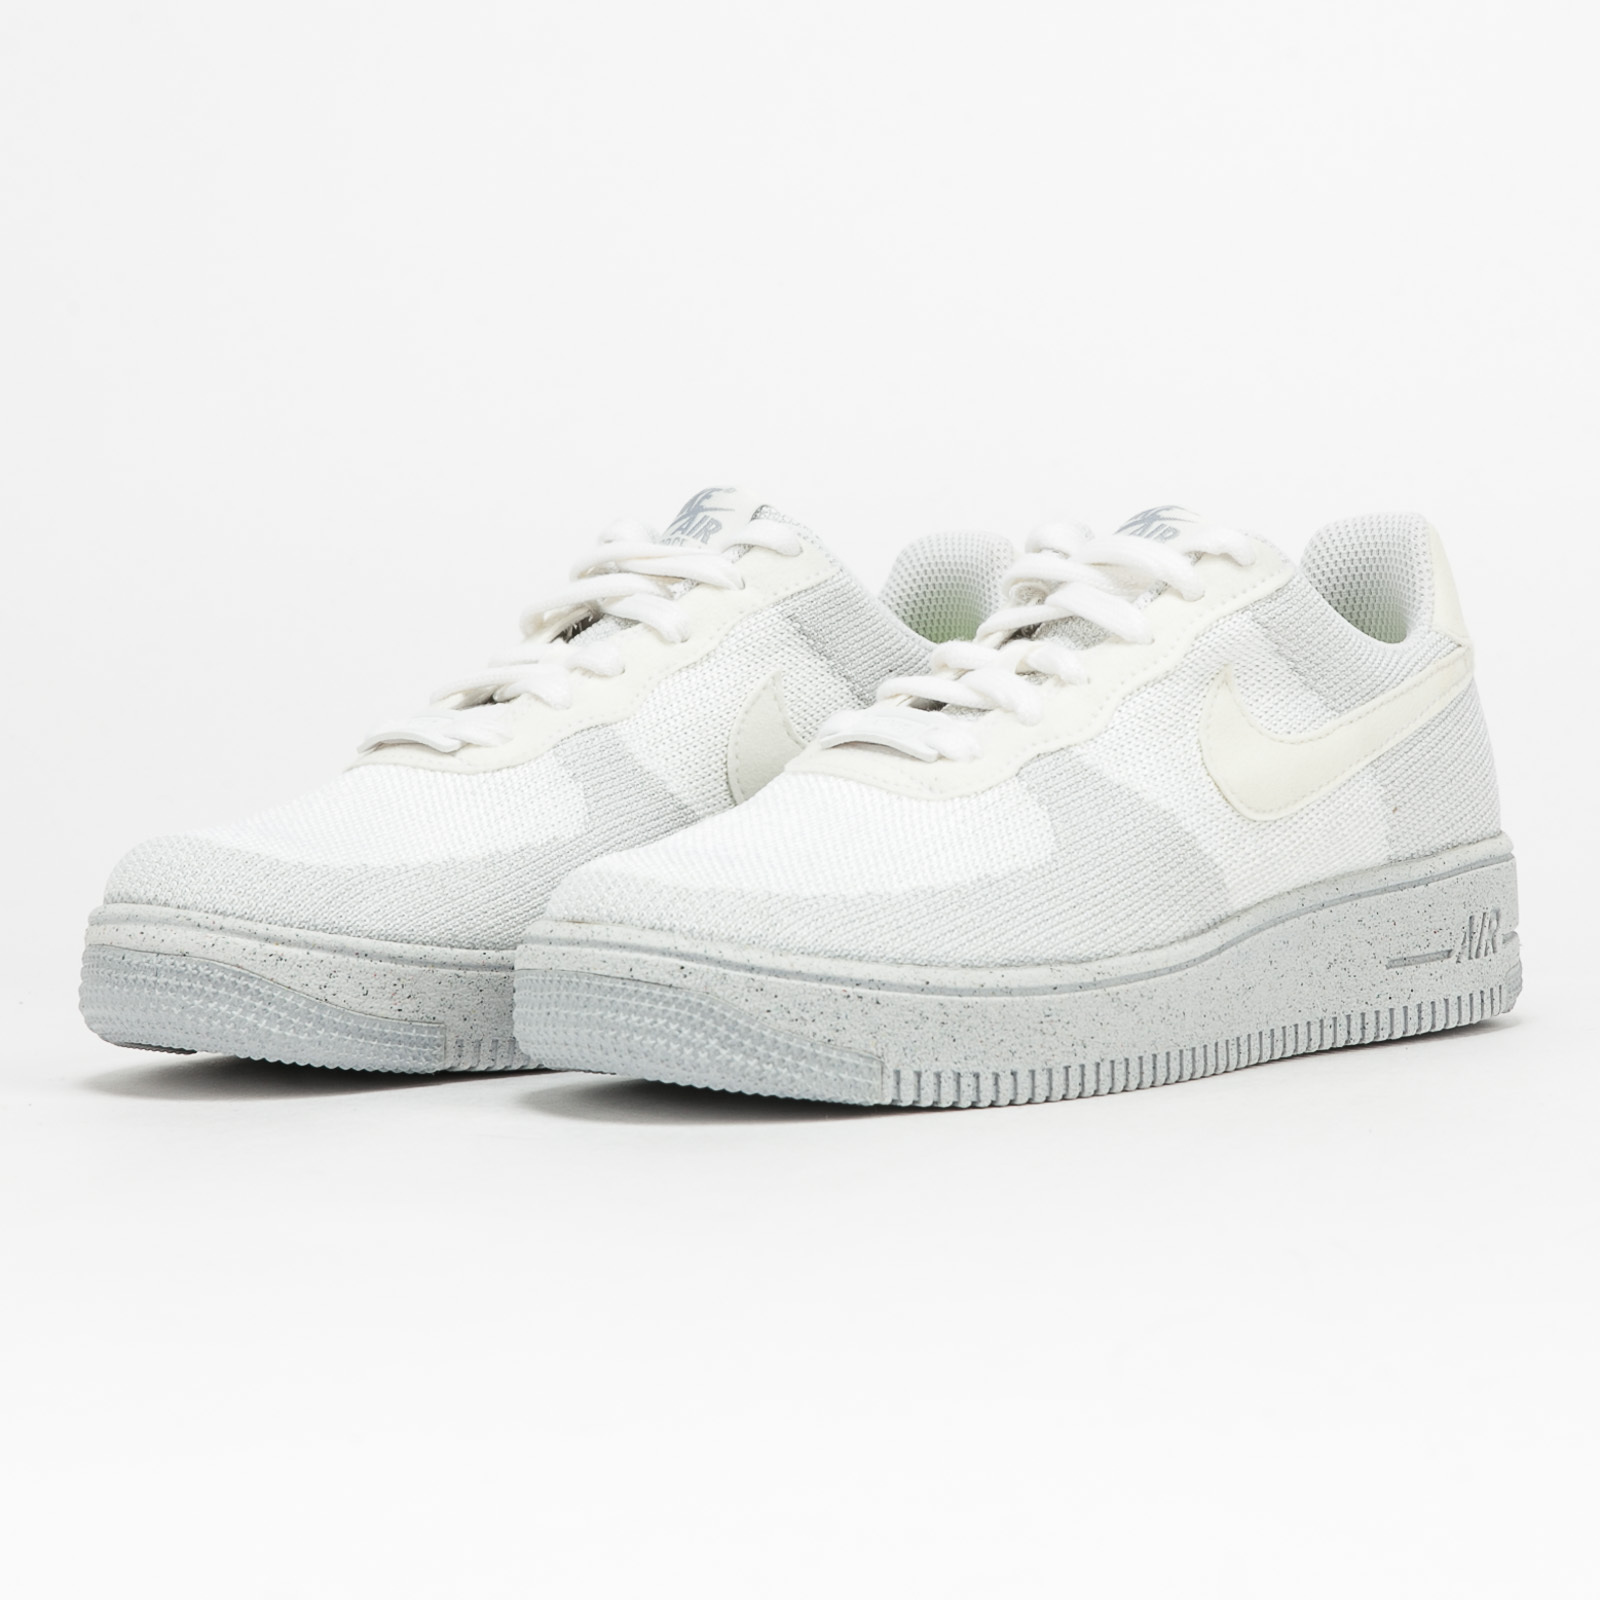 Nike Air Force 1 Crater Flyknit (GS) white / white - sail - wolf grey Nike